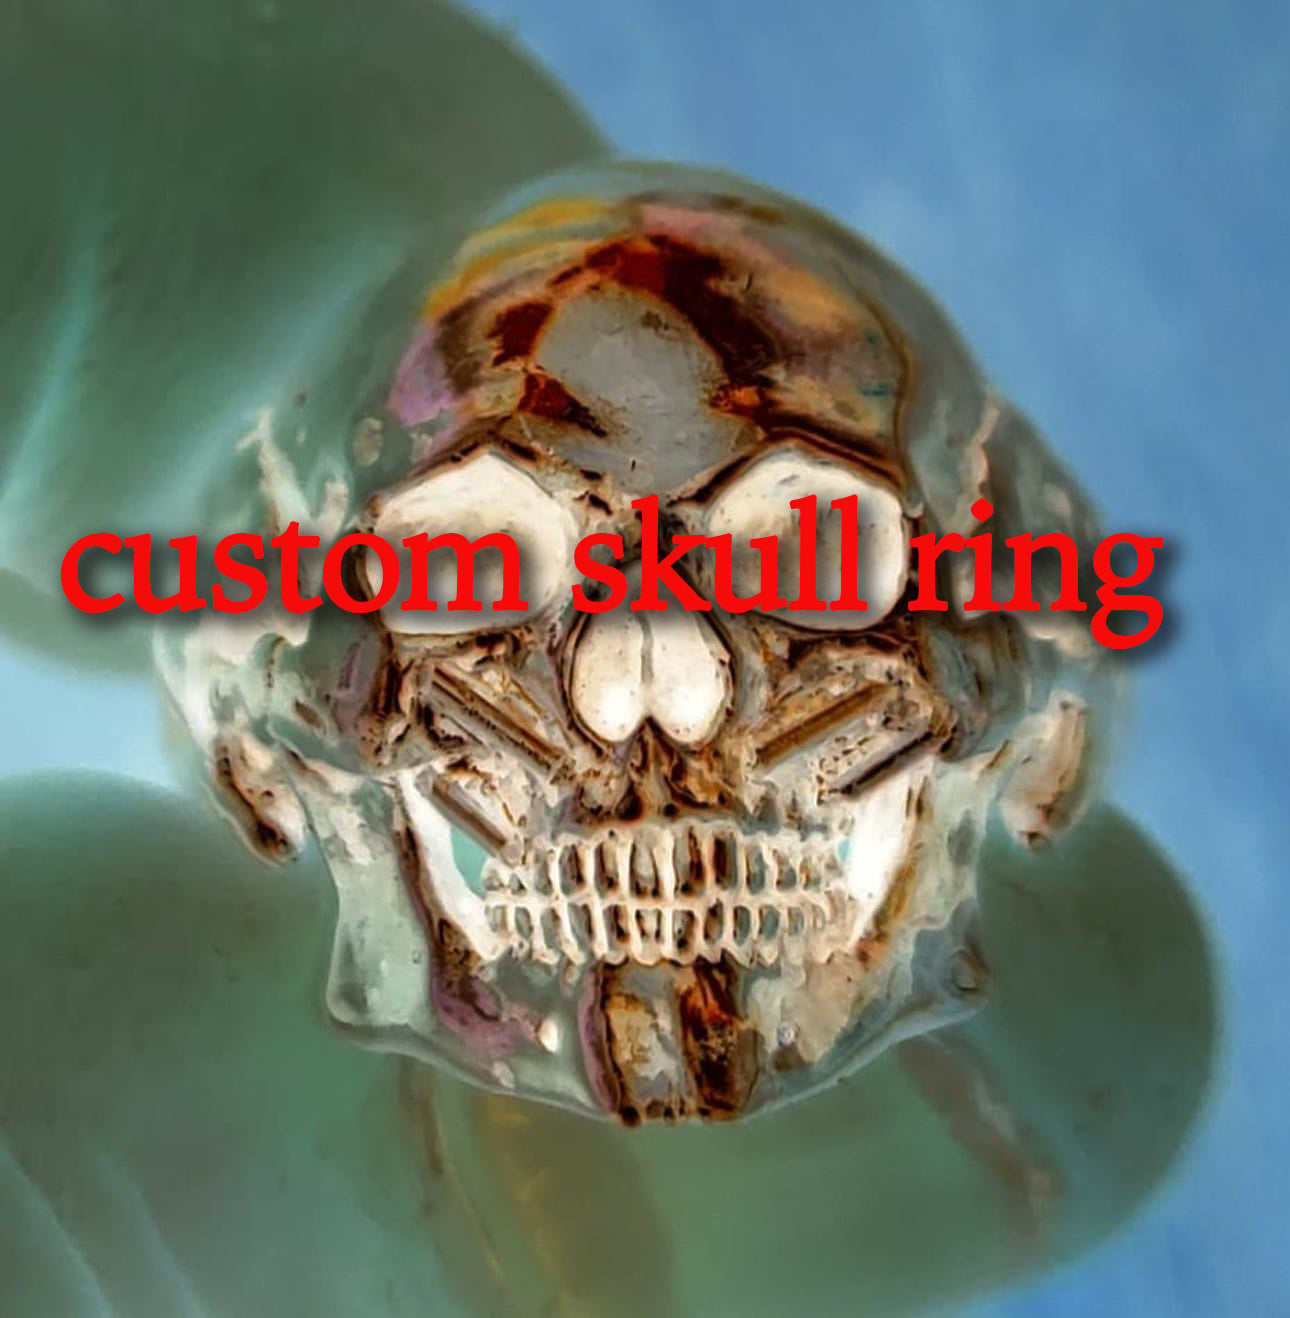 Personalized skull ring, Reserved for J., cost difference